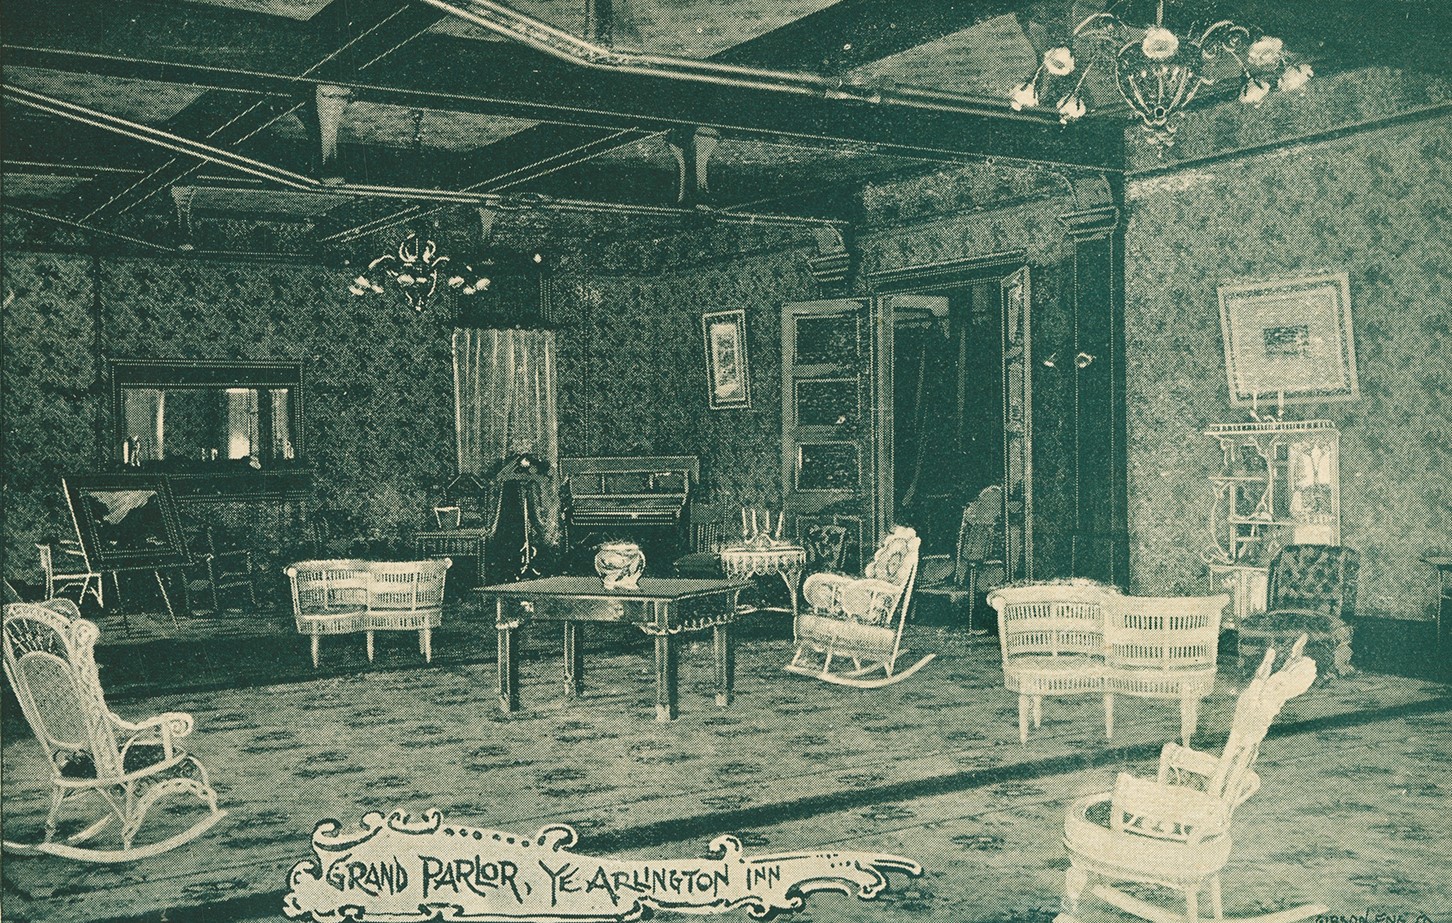 The grand parlor of Ye Arlington Inn, 1890's style furniture and decor.